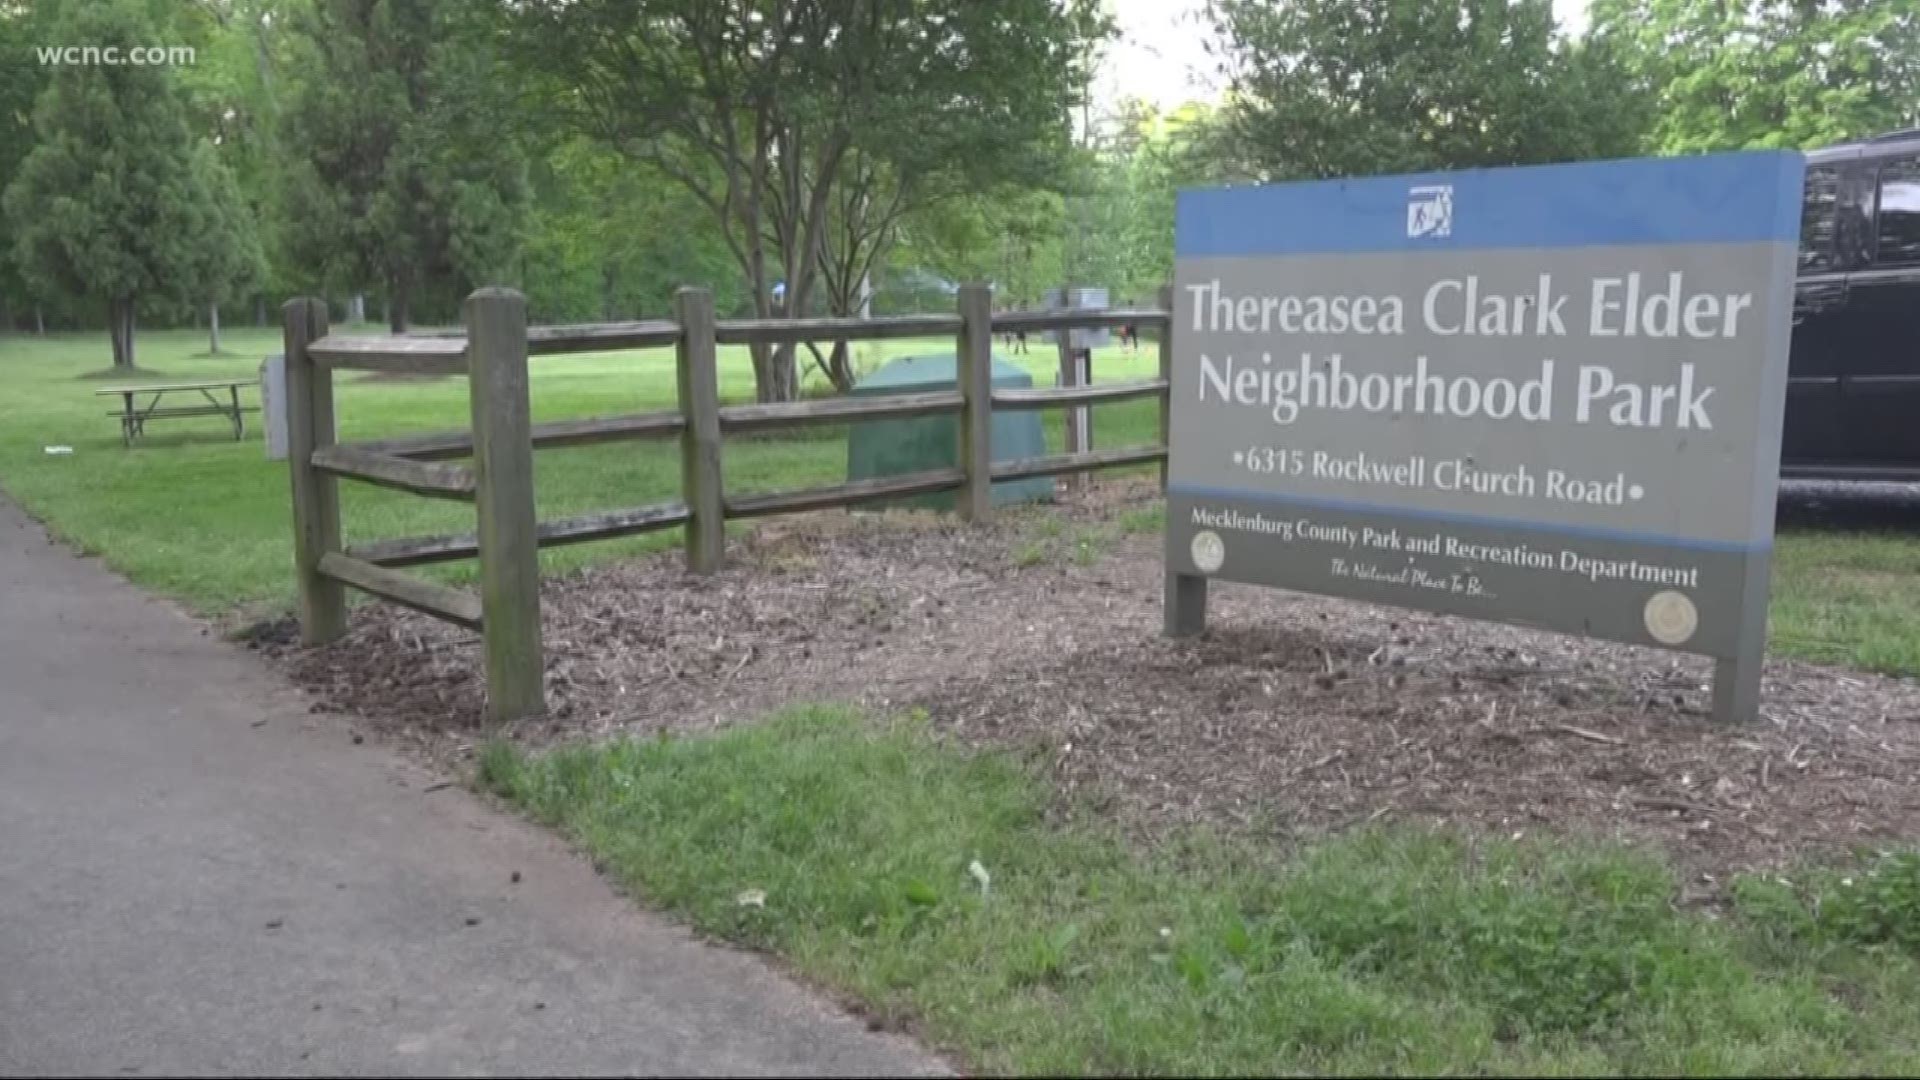 A 12-year-old boy was attacked by an unknown suspect around 7:30 p.m. Sunday at Thereasea Clark Elder Neighborhood Park, according to the police report.